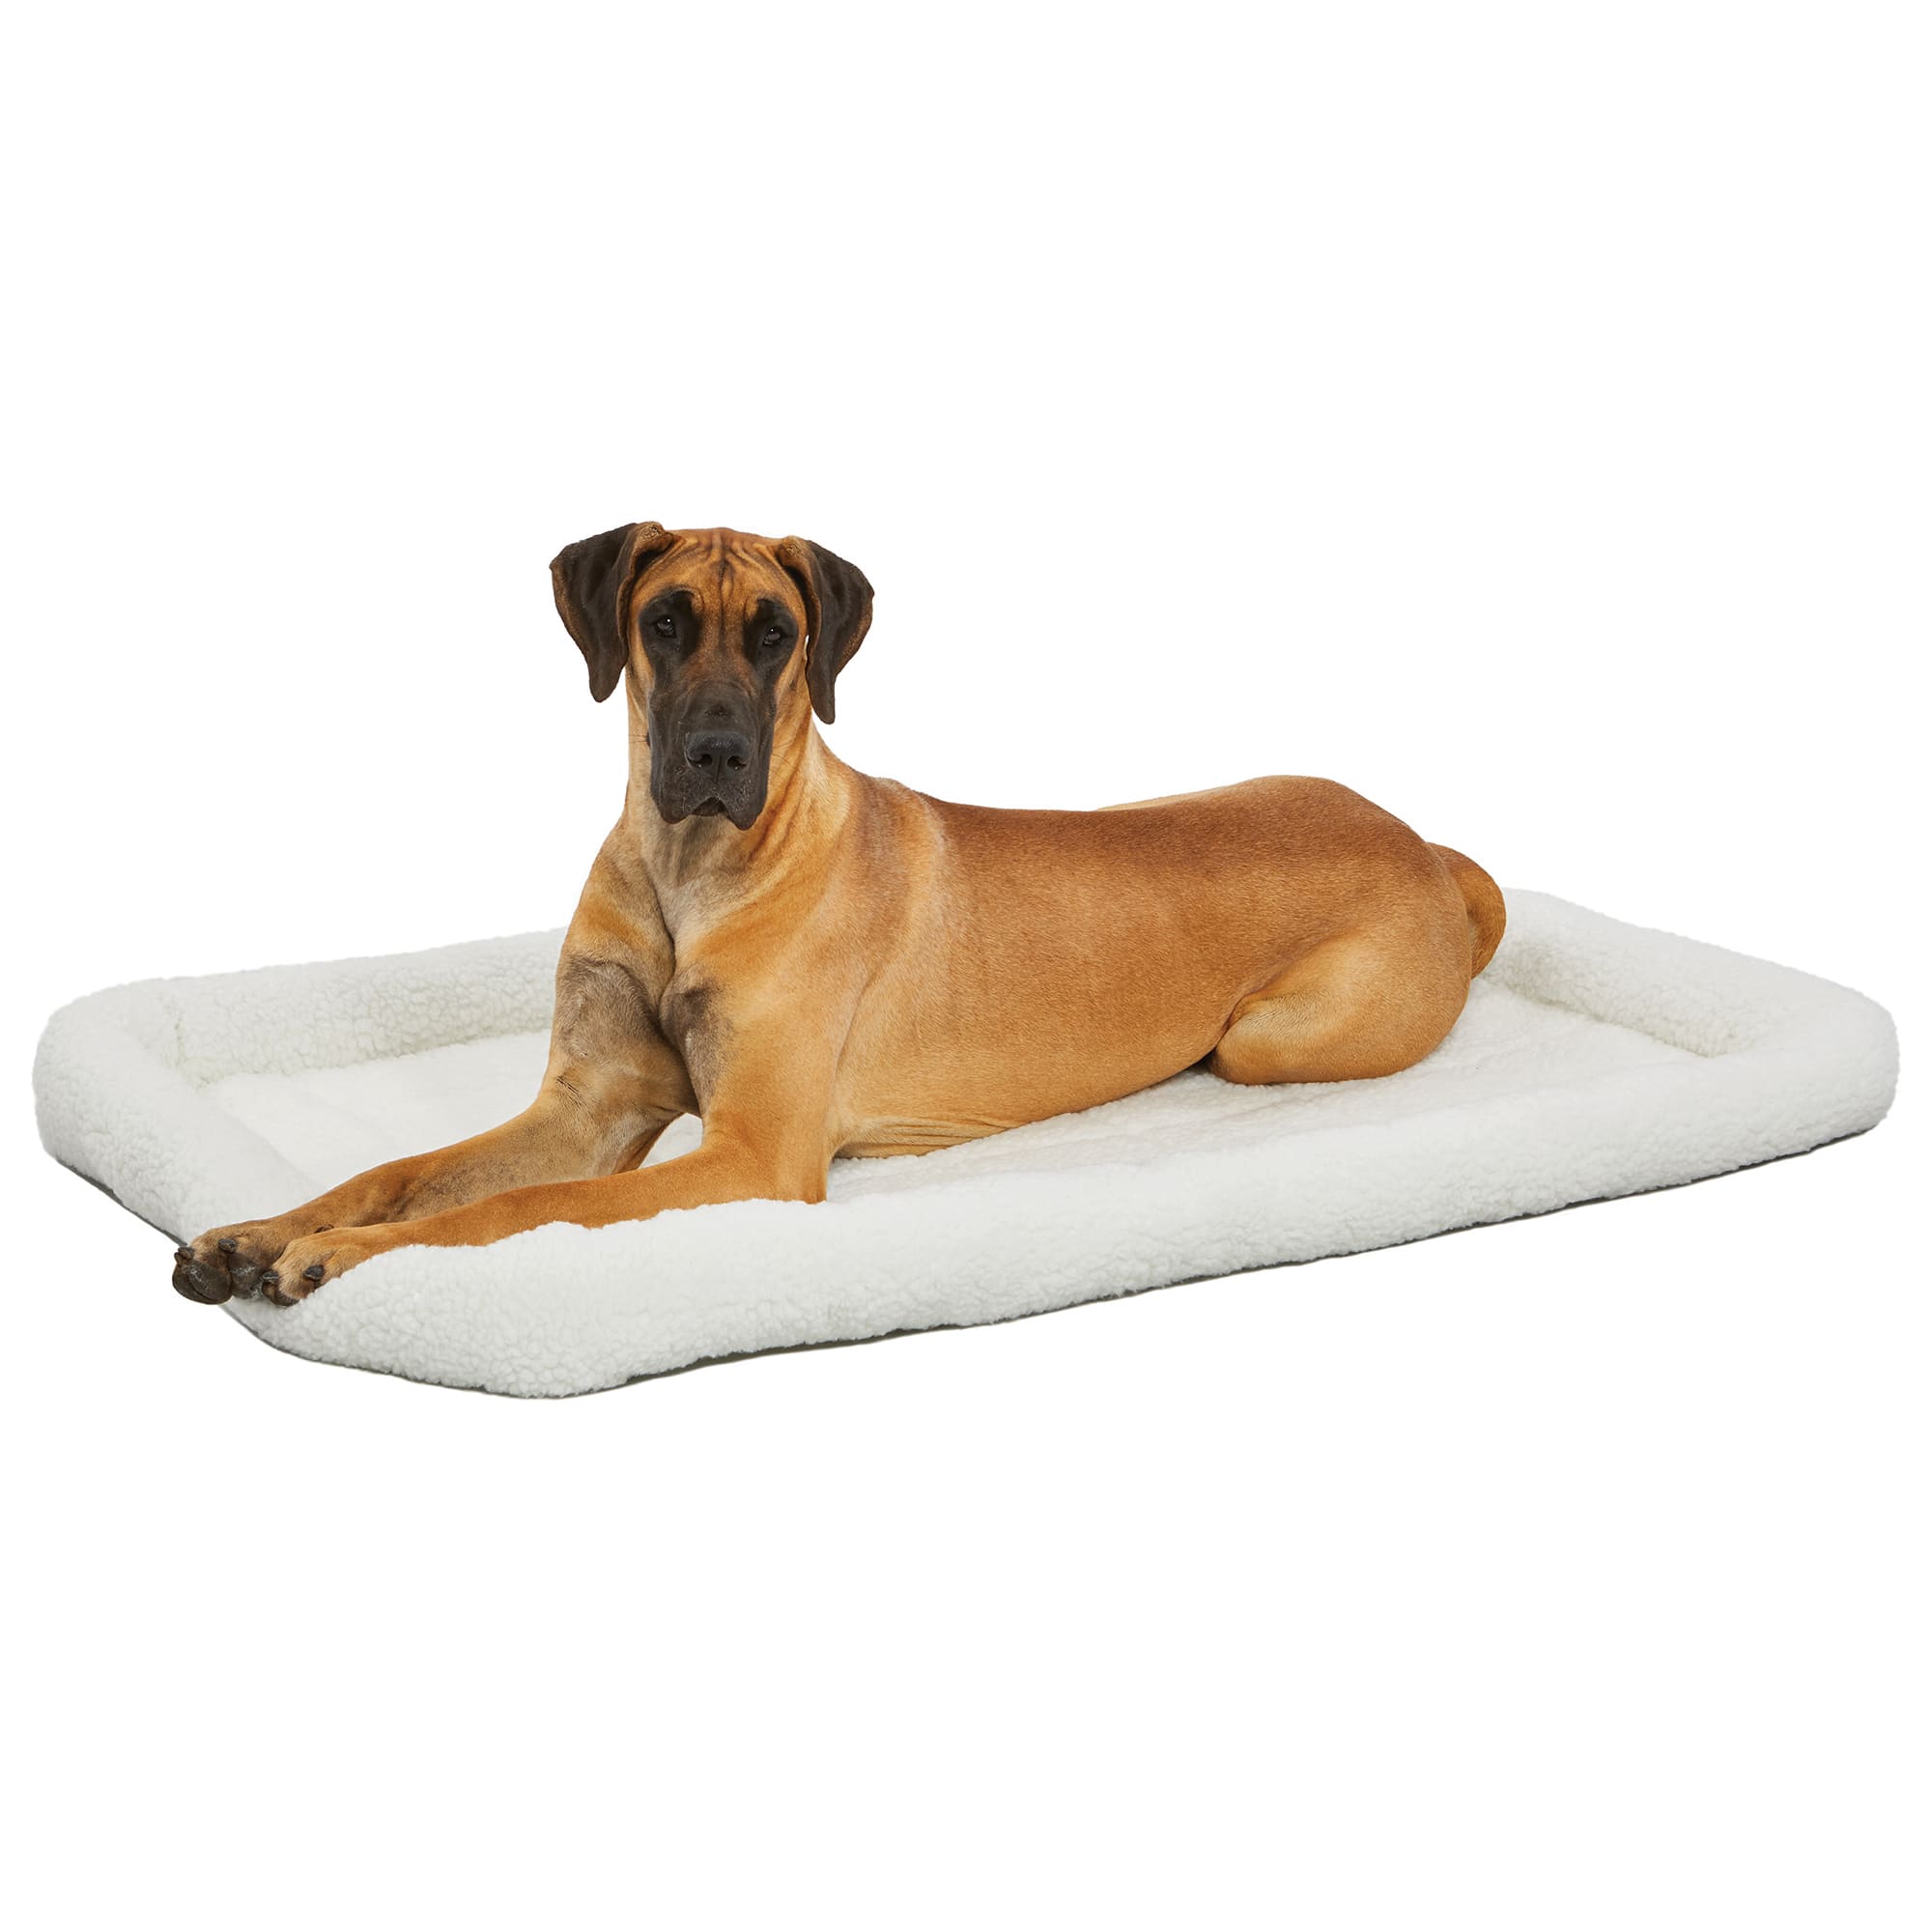 Photos - Bed & Furniture Midwest Quiet Time Bolster White Dog Bed, 54" L X 37" W, 3X-Large, 